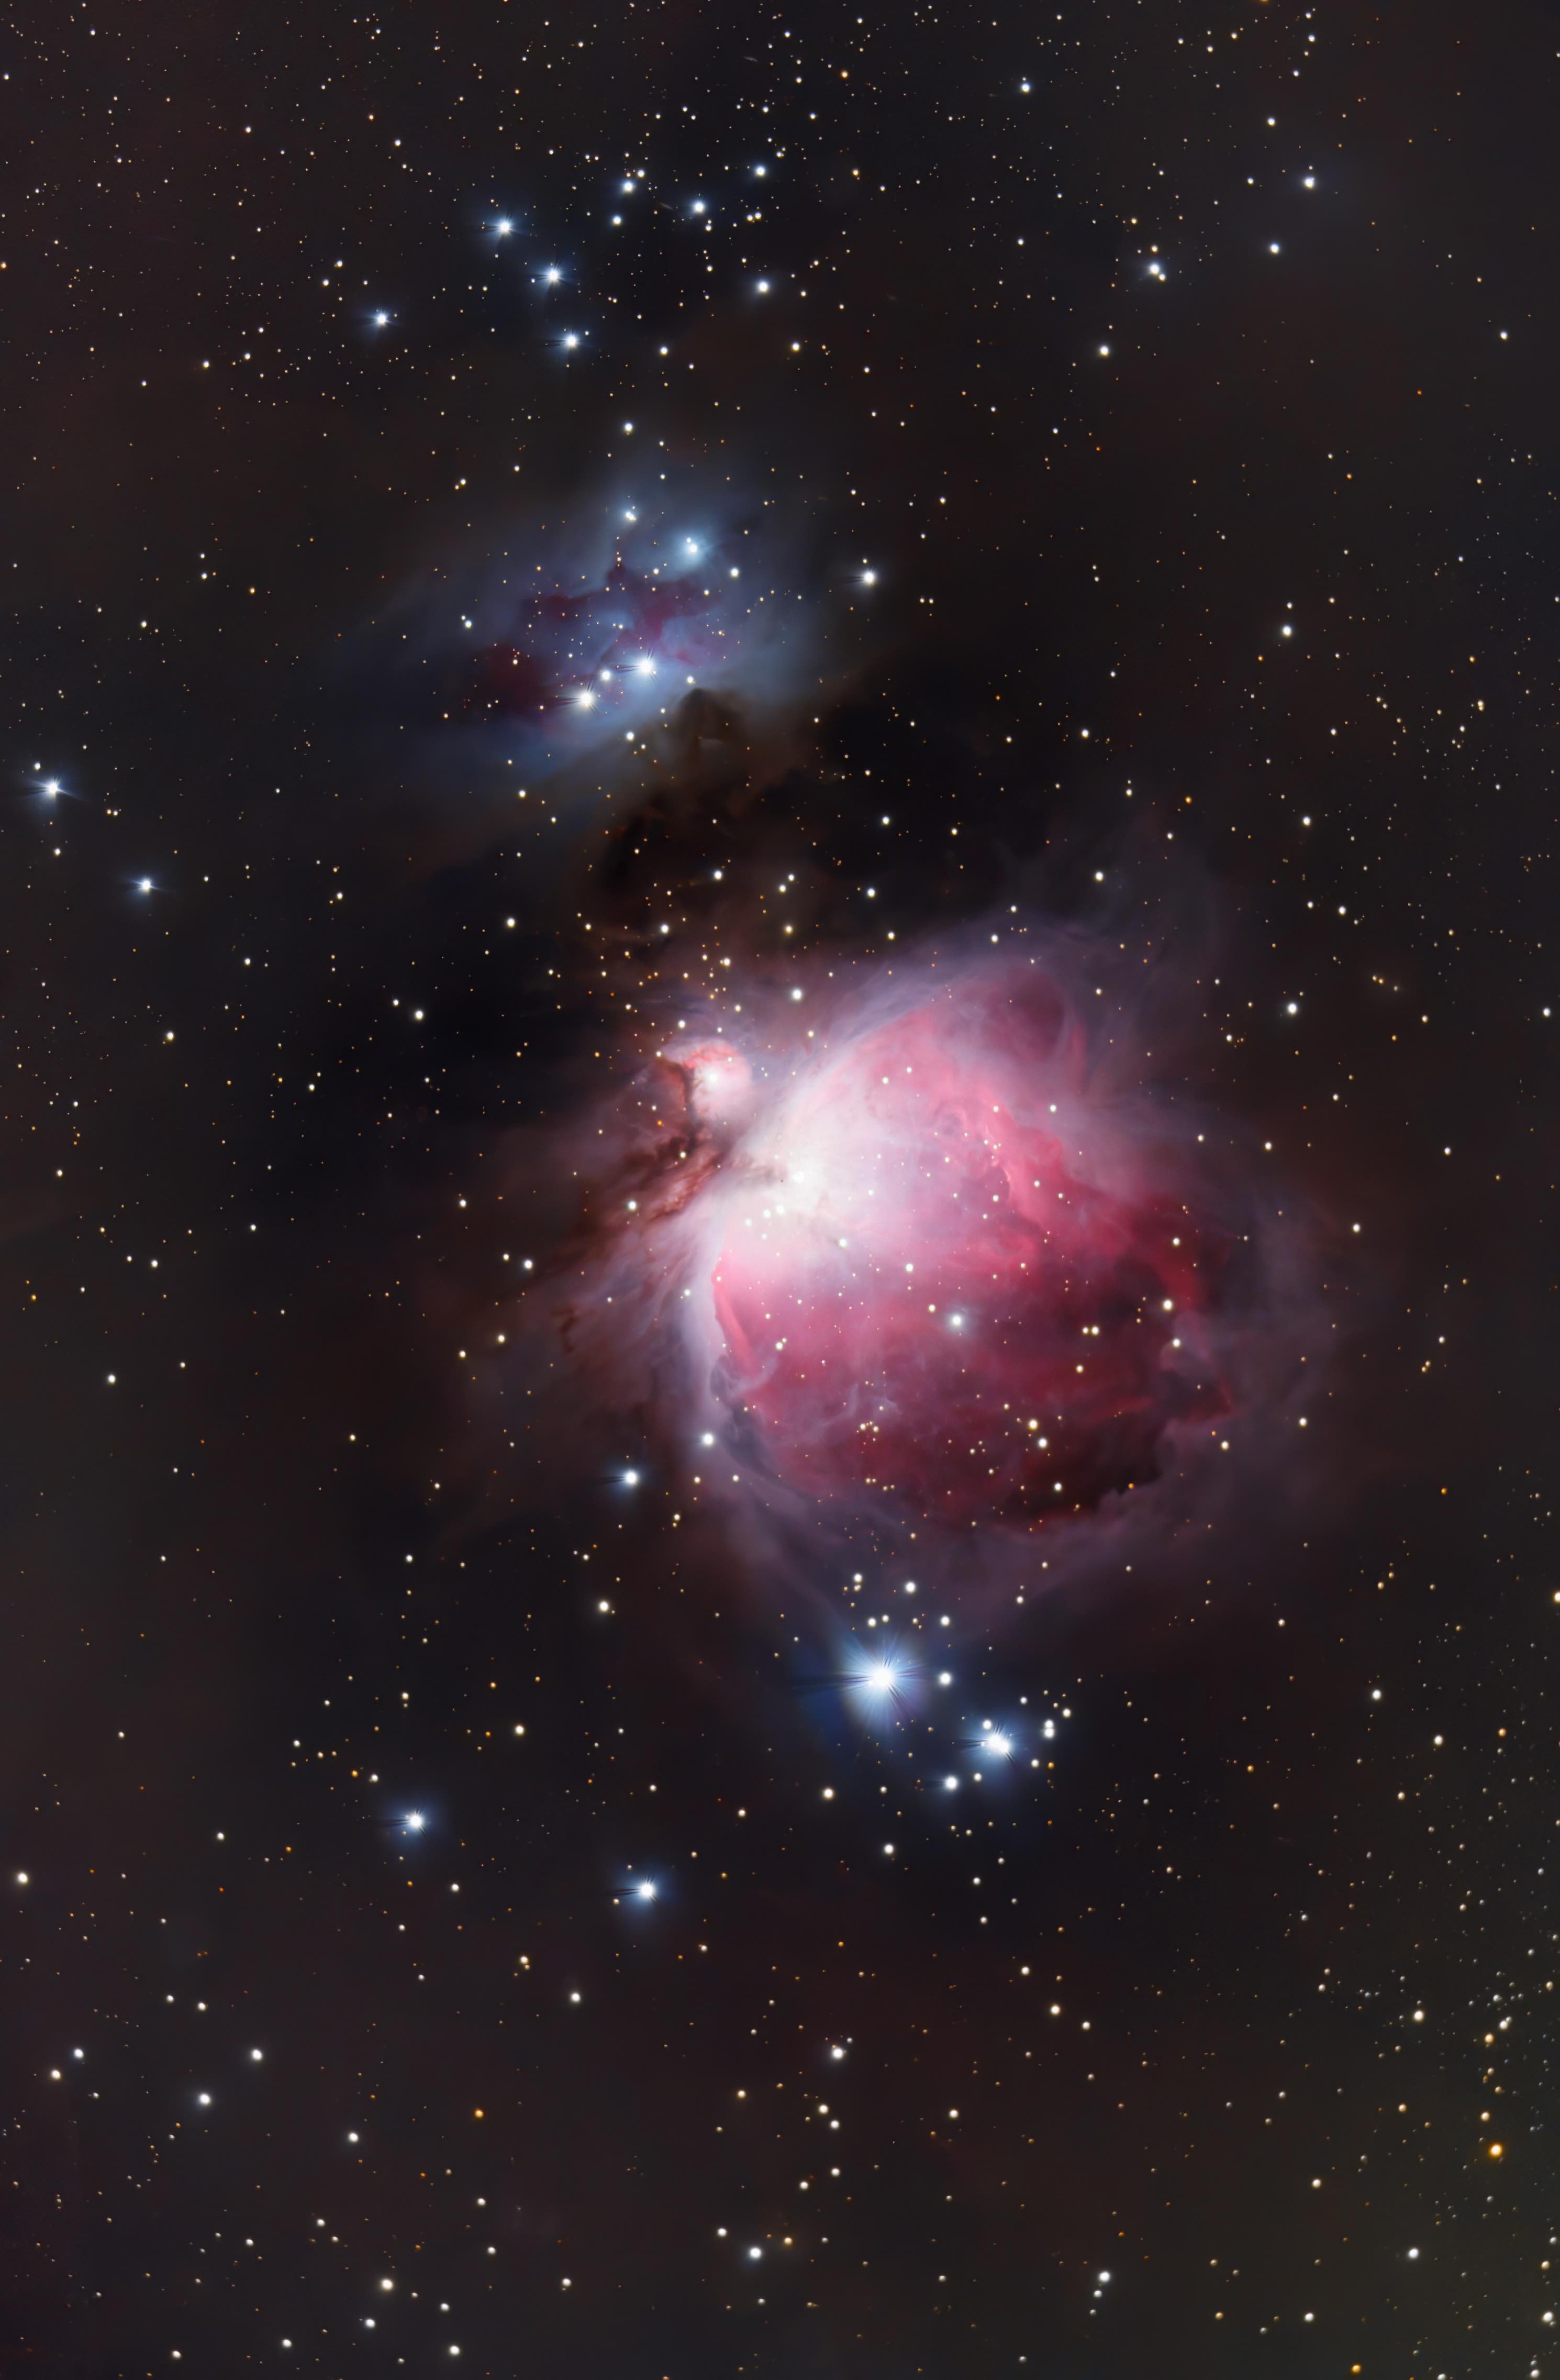 The Great Orion nebula - M42